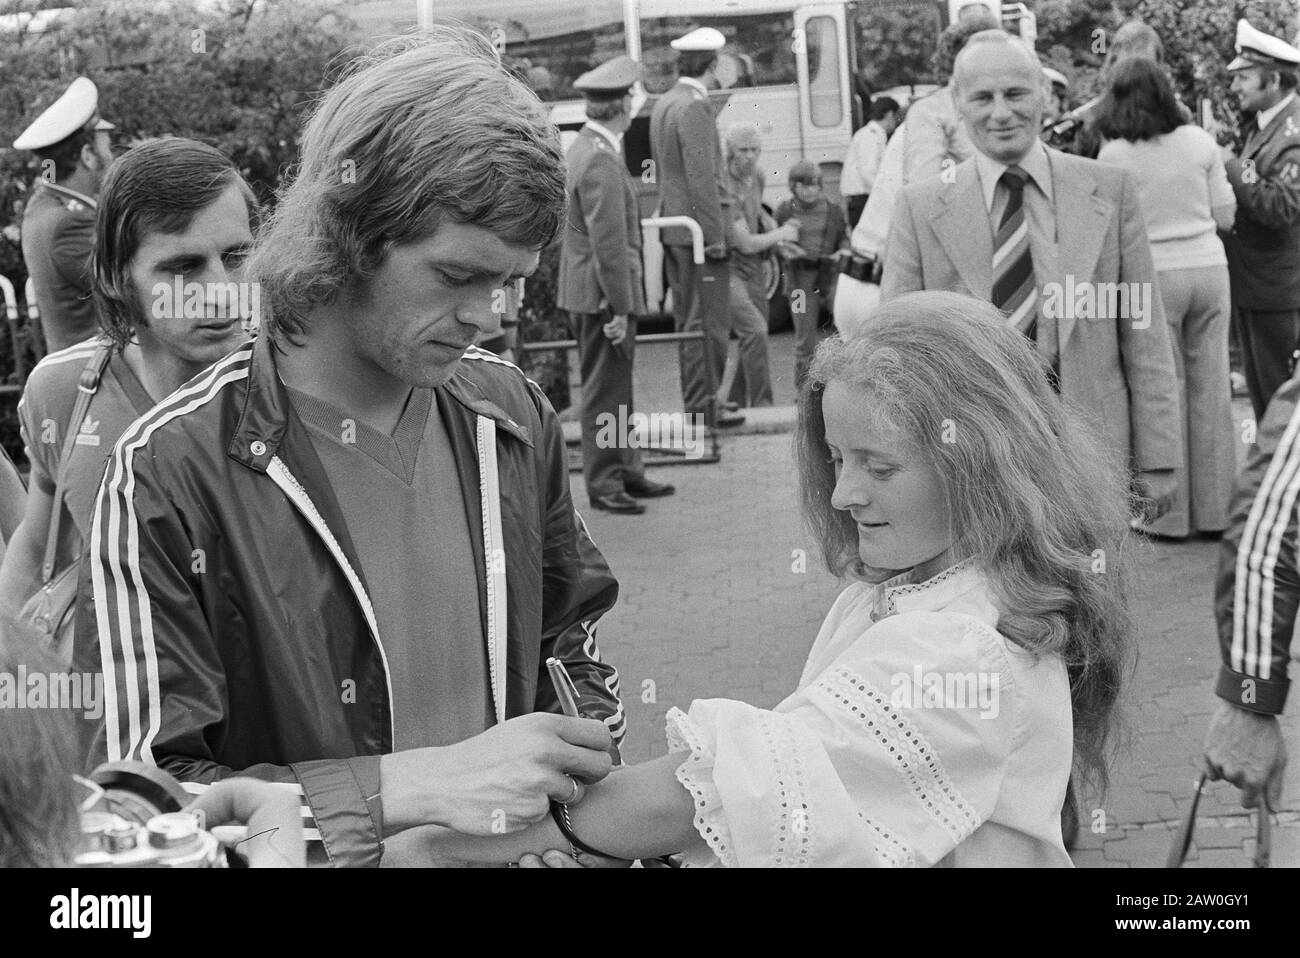 Dutch team trains in Hiltrup; Rep puts signature on arm support star Date: June 28, 1974 Keywords: teams, autographs, sports, soccer, World Cup Stock Photo